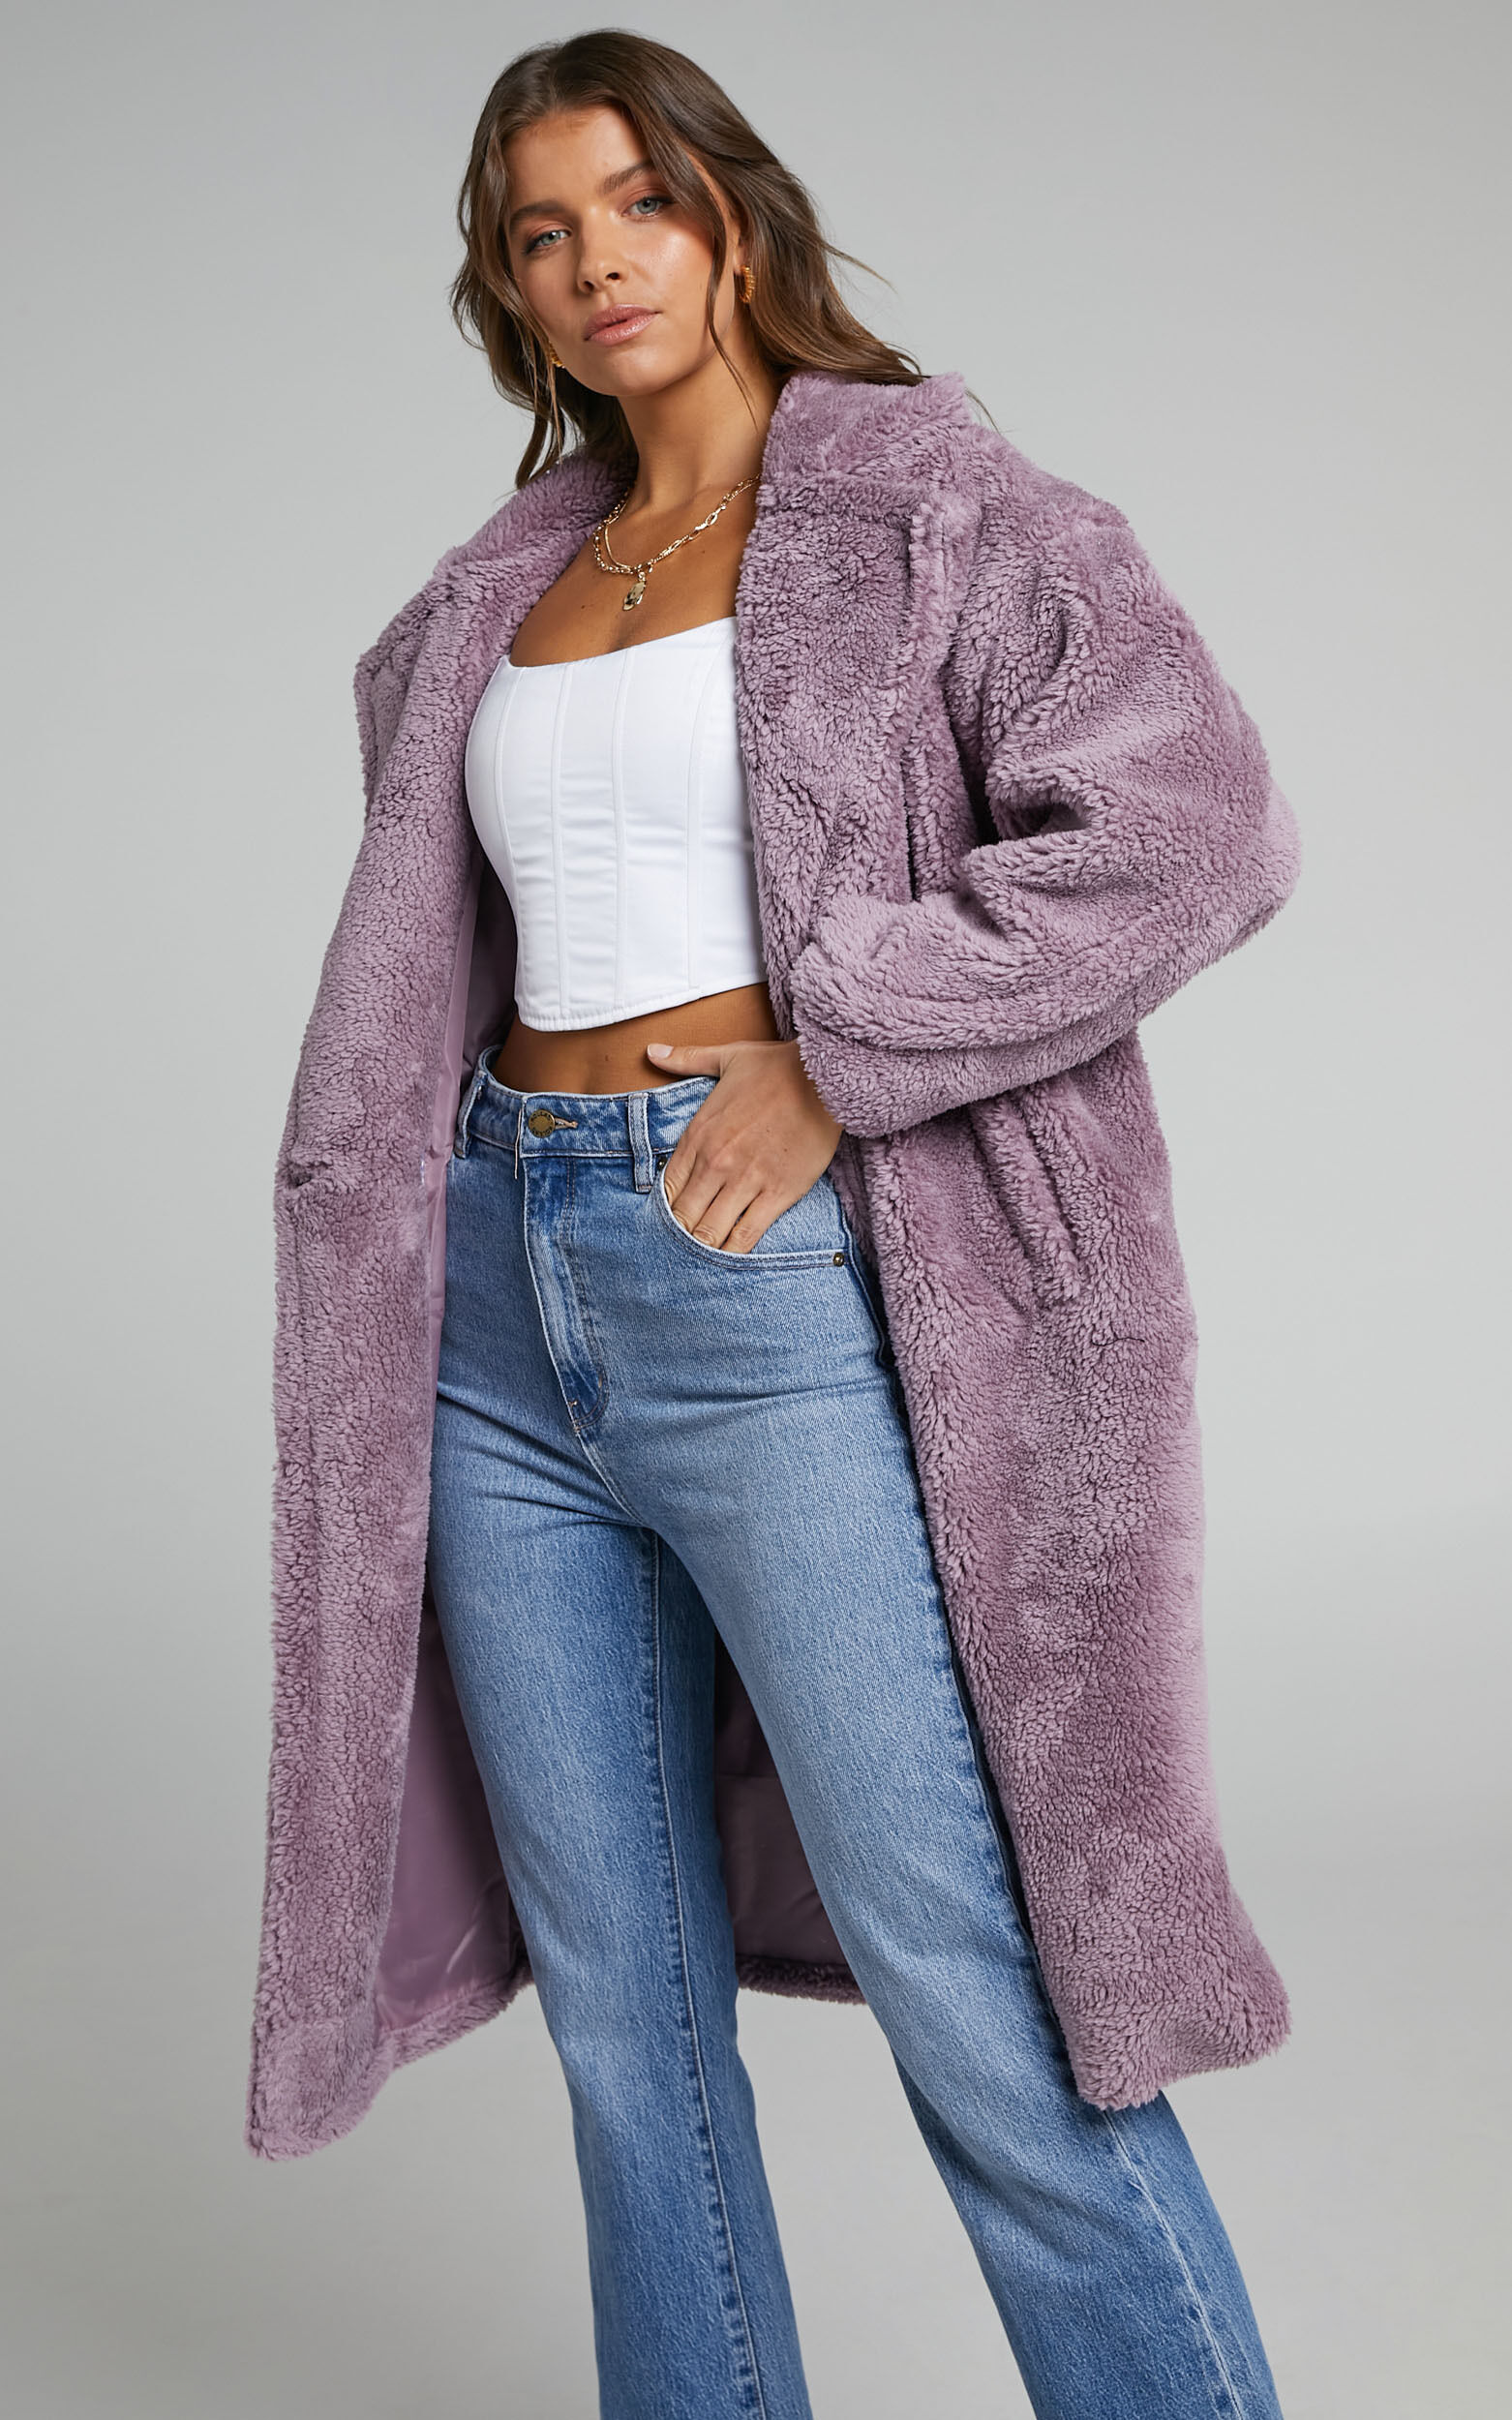 Clariece Oversized Teddy Coat in Pink - M/L, PNK1, super-hi-res image number null